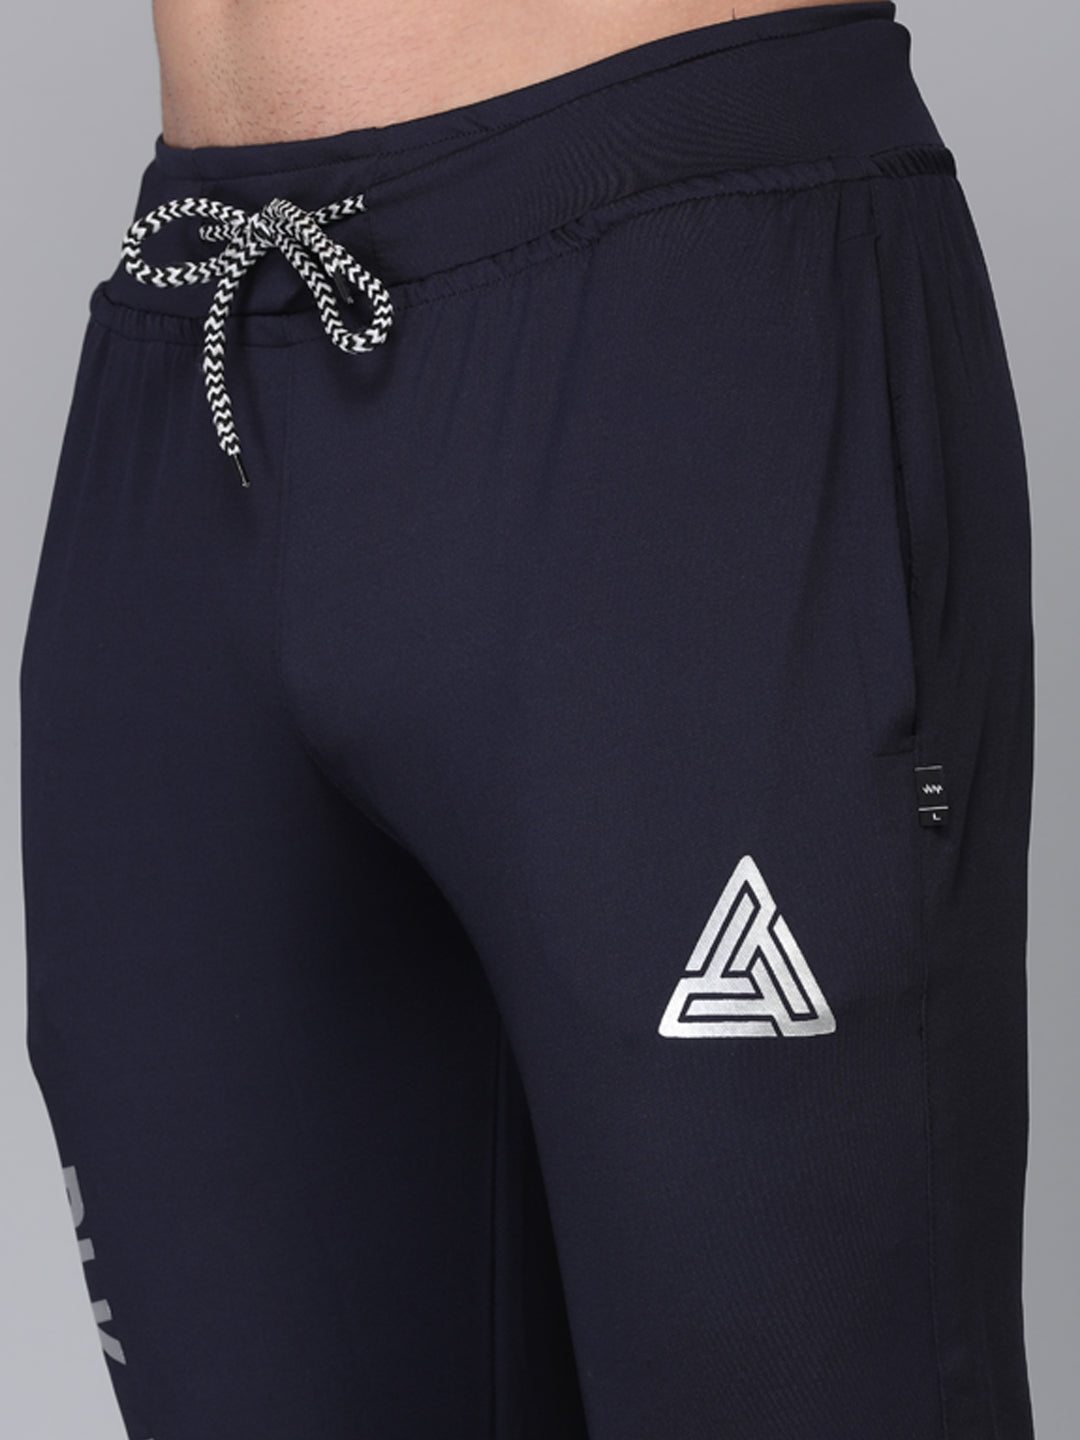 White Moon Men's Dry fit Lycra Sports Lower (Navy) whitemoon.in